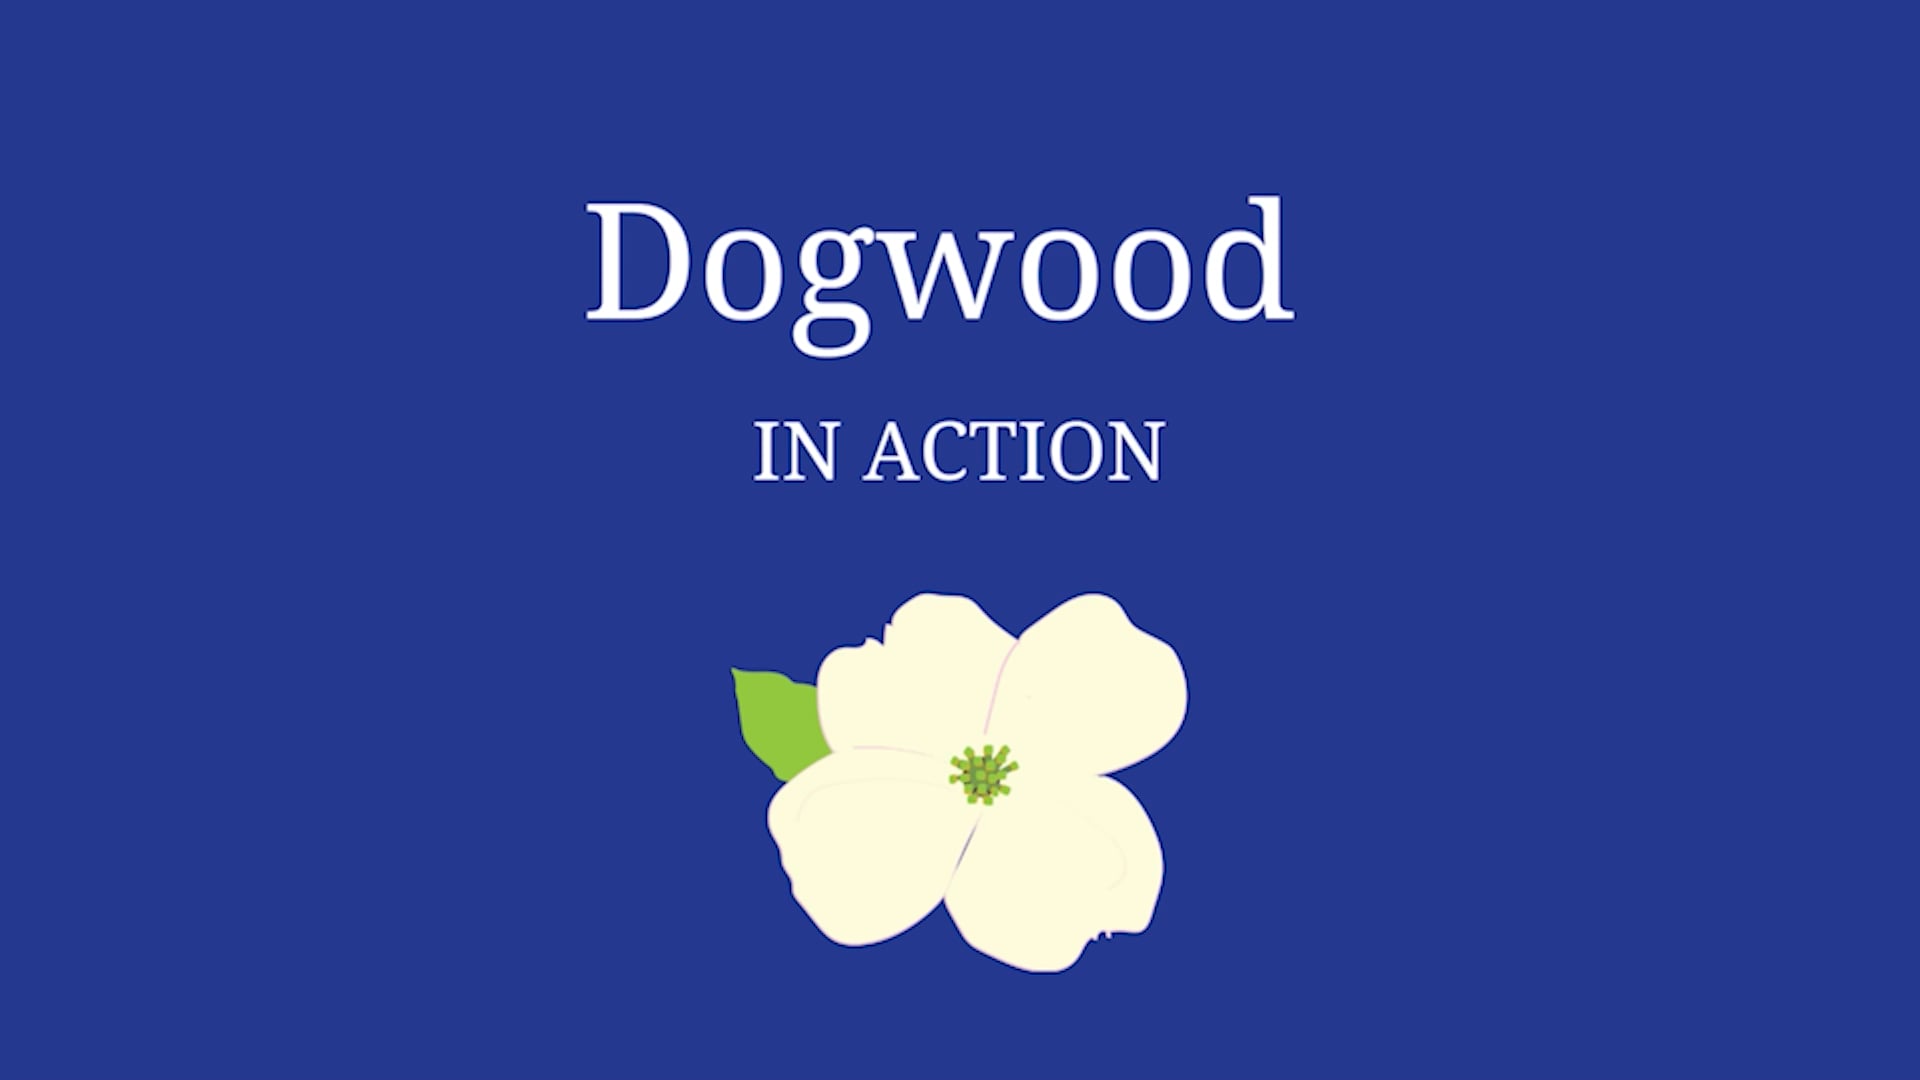 Dogwood in Action